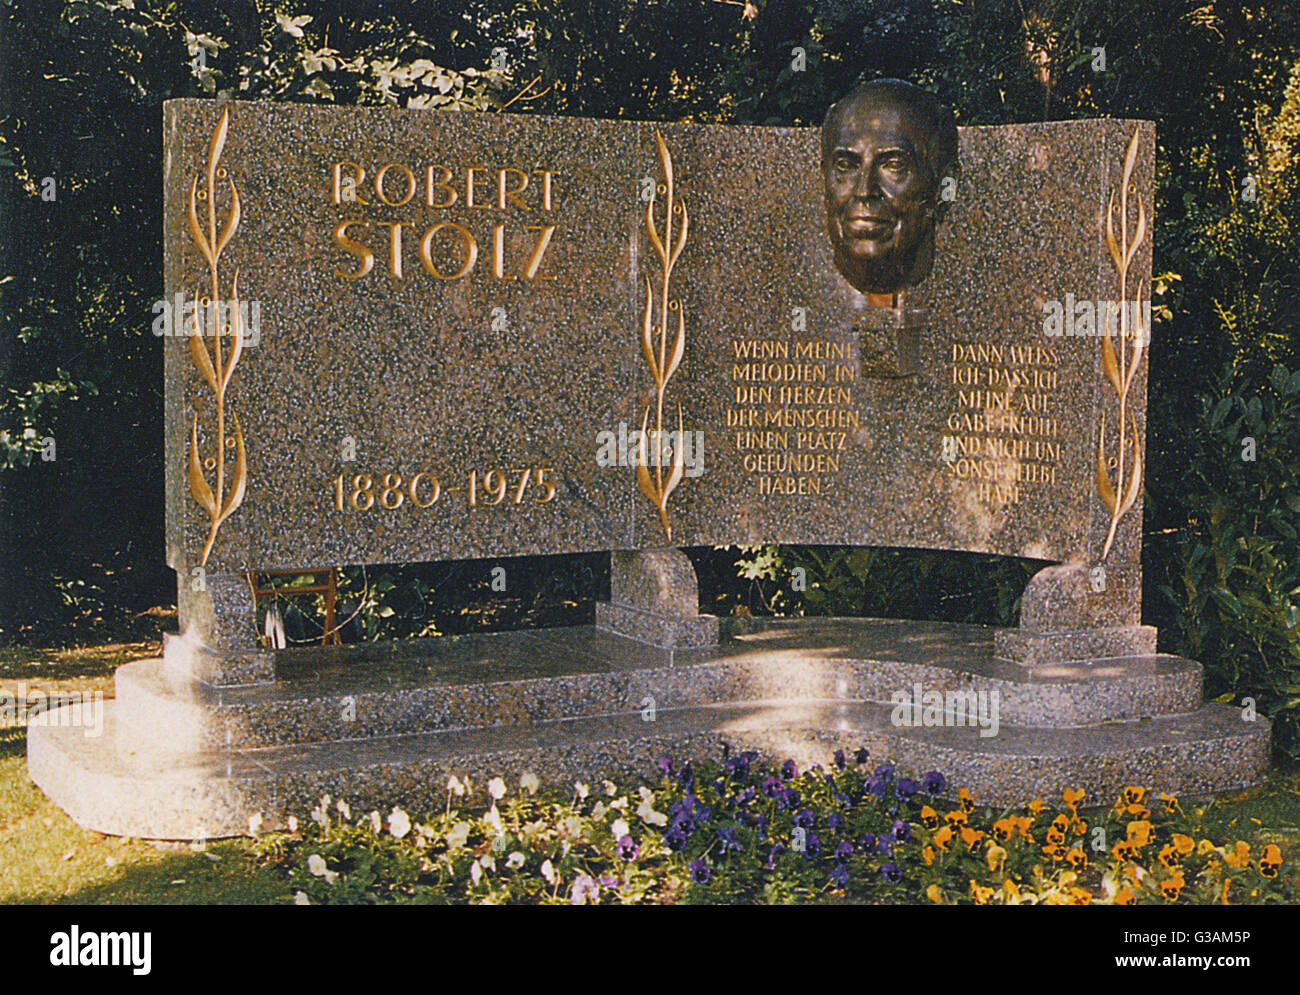 Memorial to Austrian Songwriter and Conductor Robert Stolz (1880-1975) next to the Johann Strauss Monument in the City Park (Stadtpark) in Vienna (Wien), Austria. Stolz composed operettas and film music.     Date: circa late 1970s Stock Photo